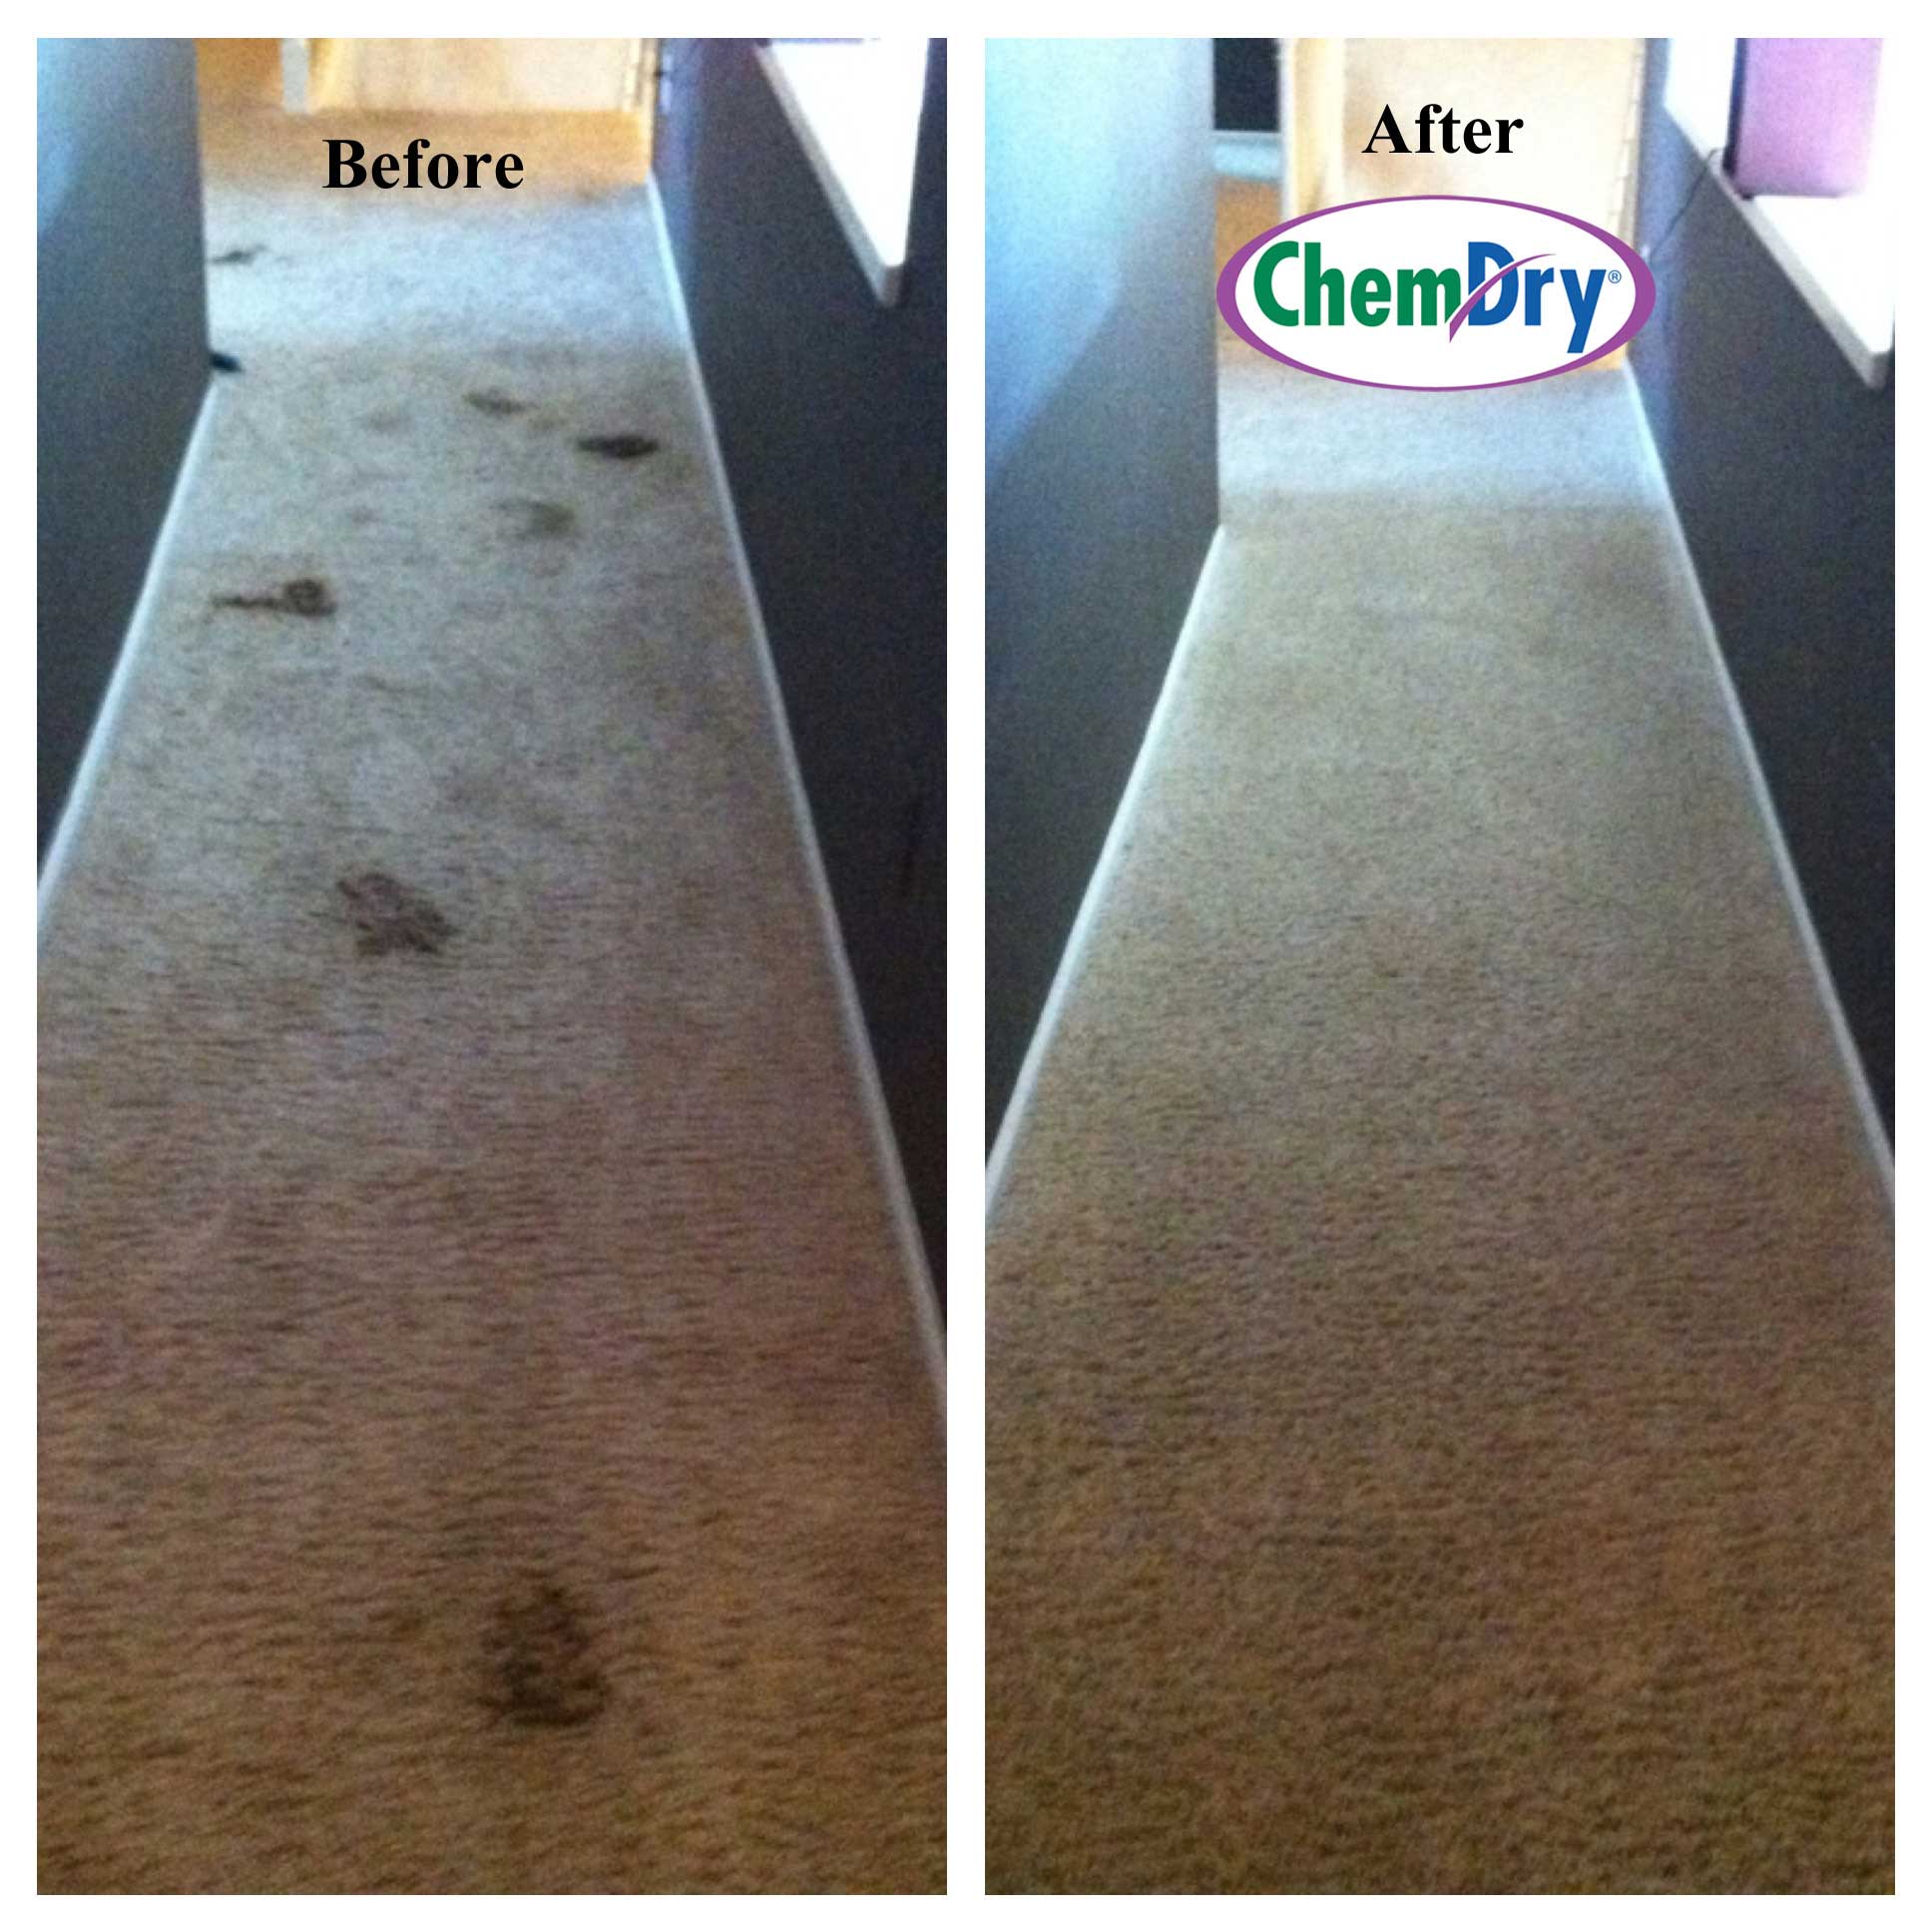 Chem-Dry removes 98% allergens as well as dirt